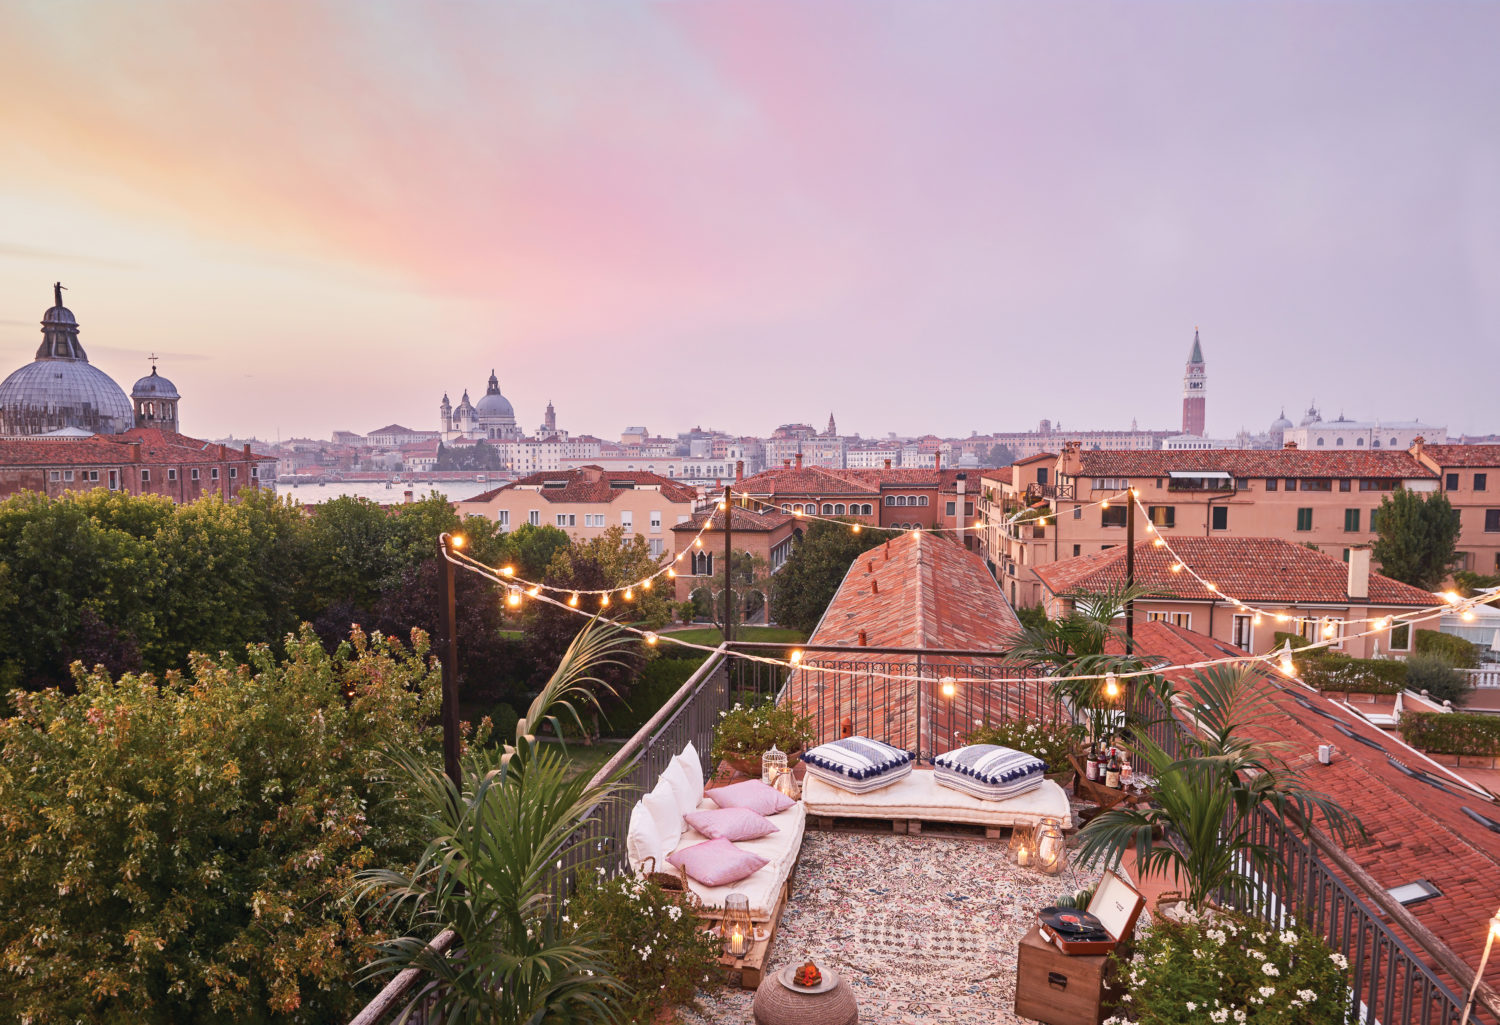 VENICE, ITALY -9 APR 2019- View of the Belmond Hotel Cipriani, a